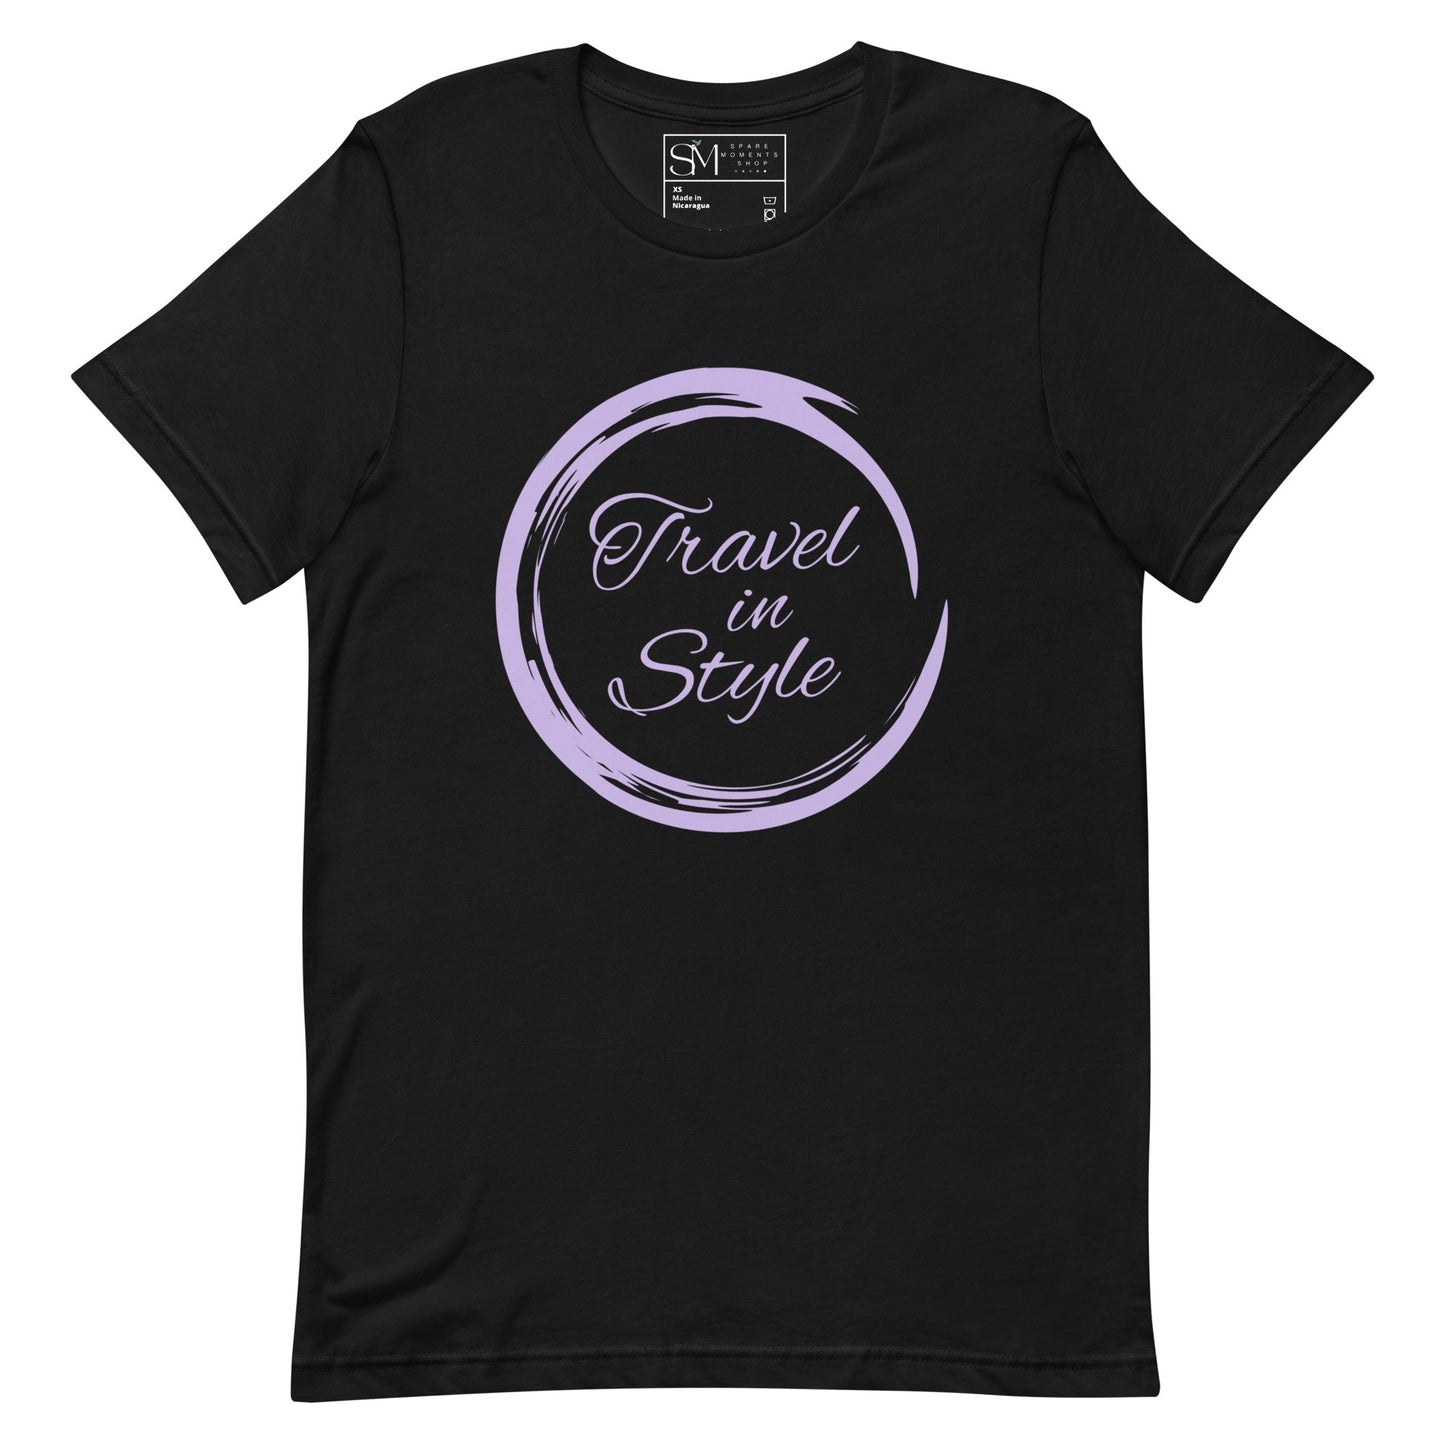 Cute Travel Themed Shirts | Women’s Graphic Travel T-Shirts